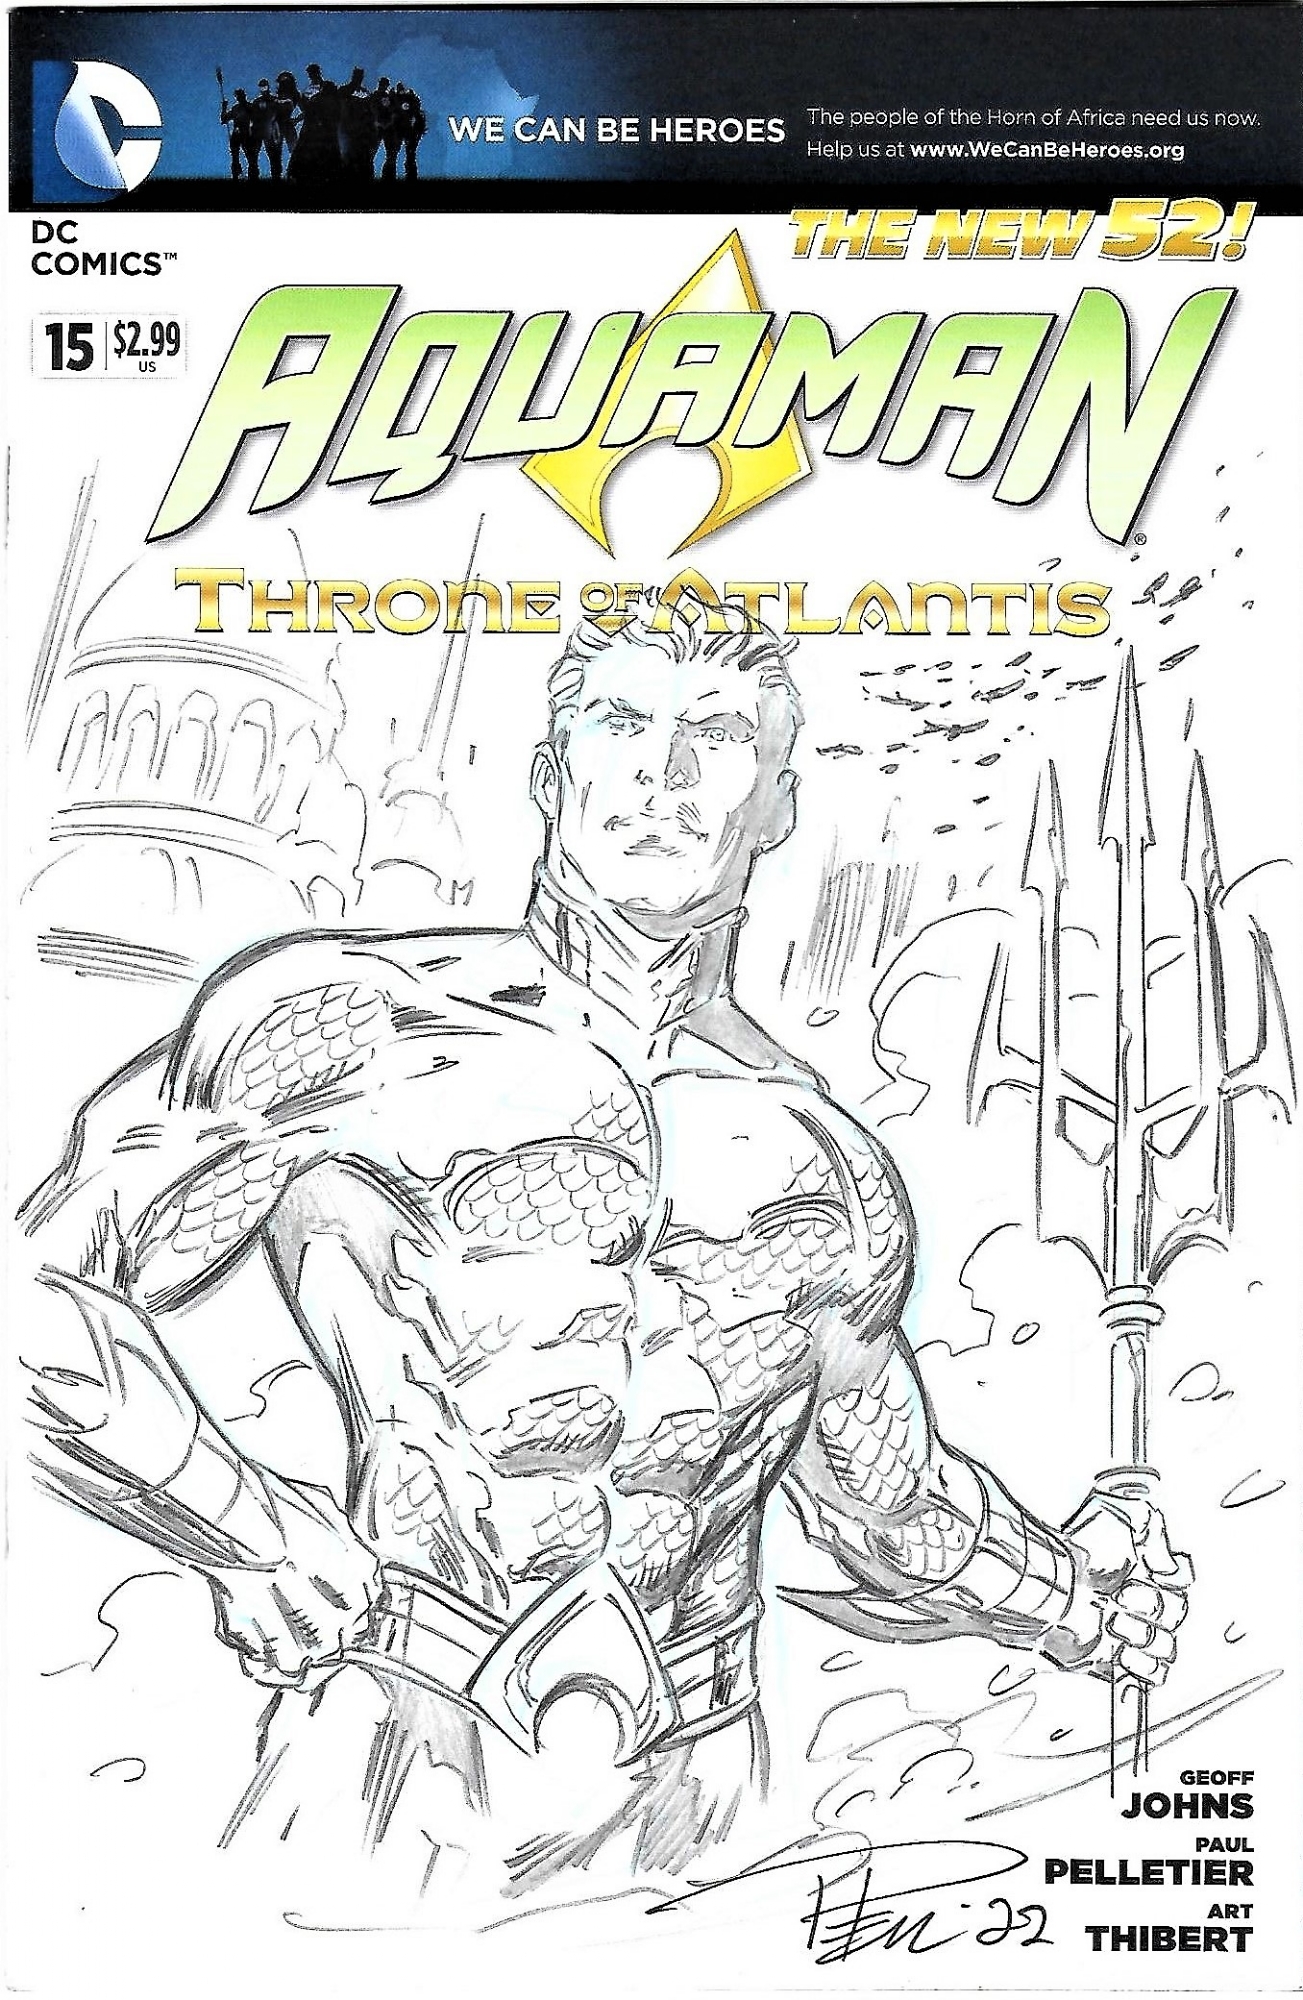 Aquaman from the Justice League sketch cover by Paul Pelletier (ALL), in  James Posey's Commissions Comic Art Gallery Room